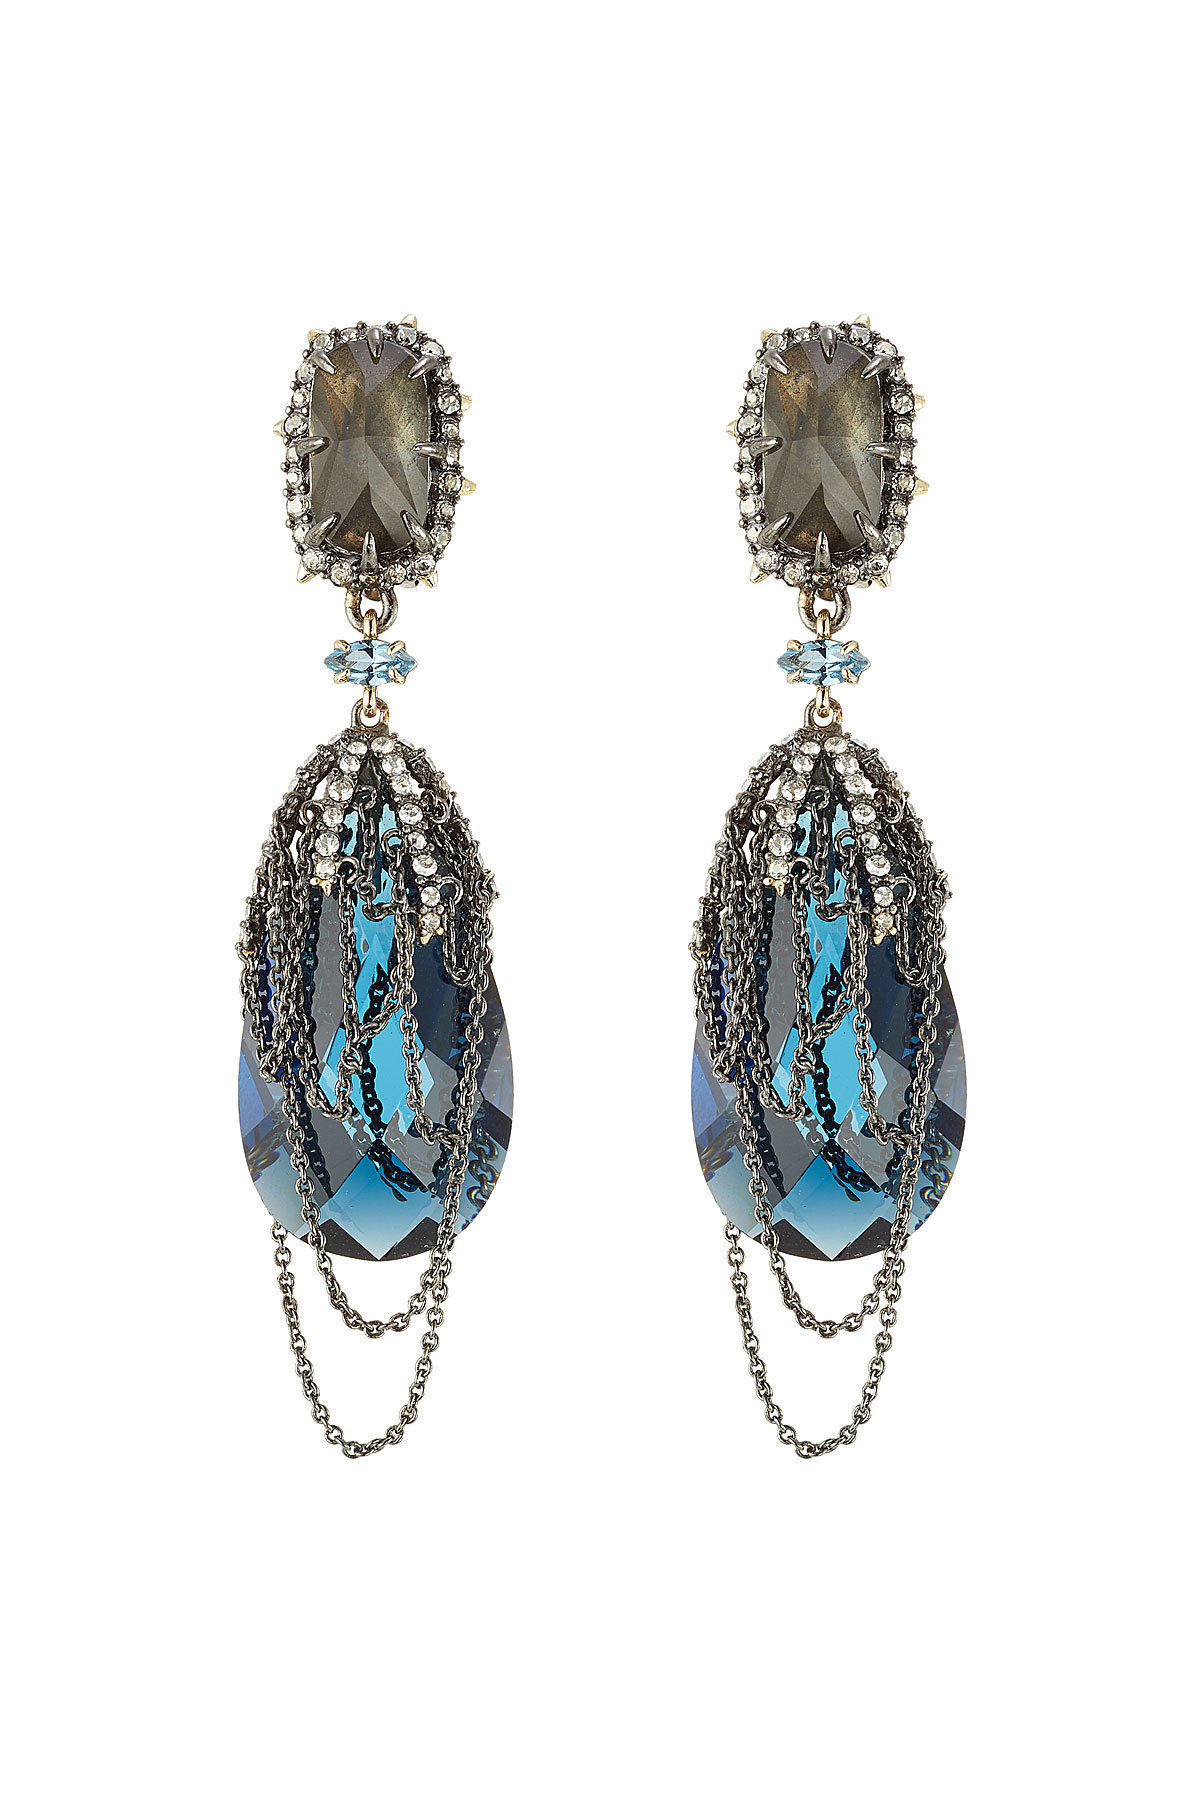 Alexis Bittar - Draped Chain and Crystal Earrings